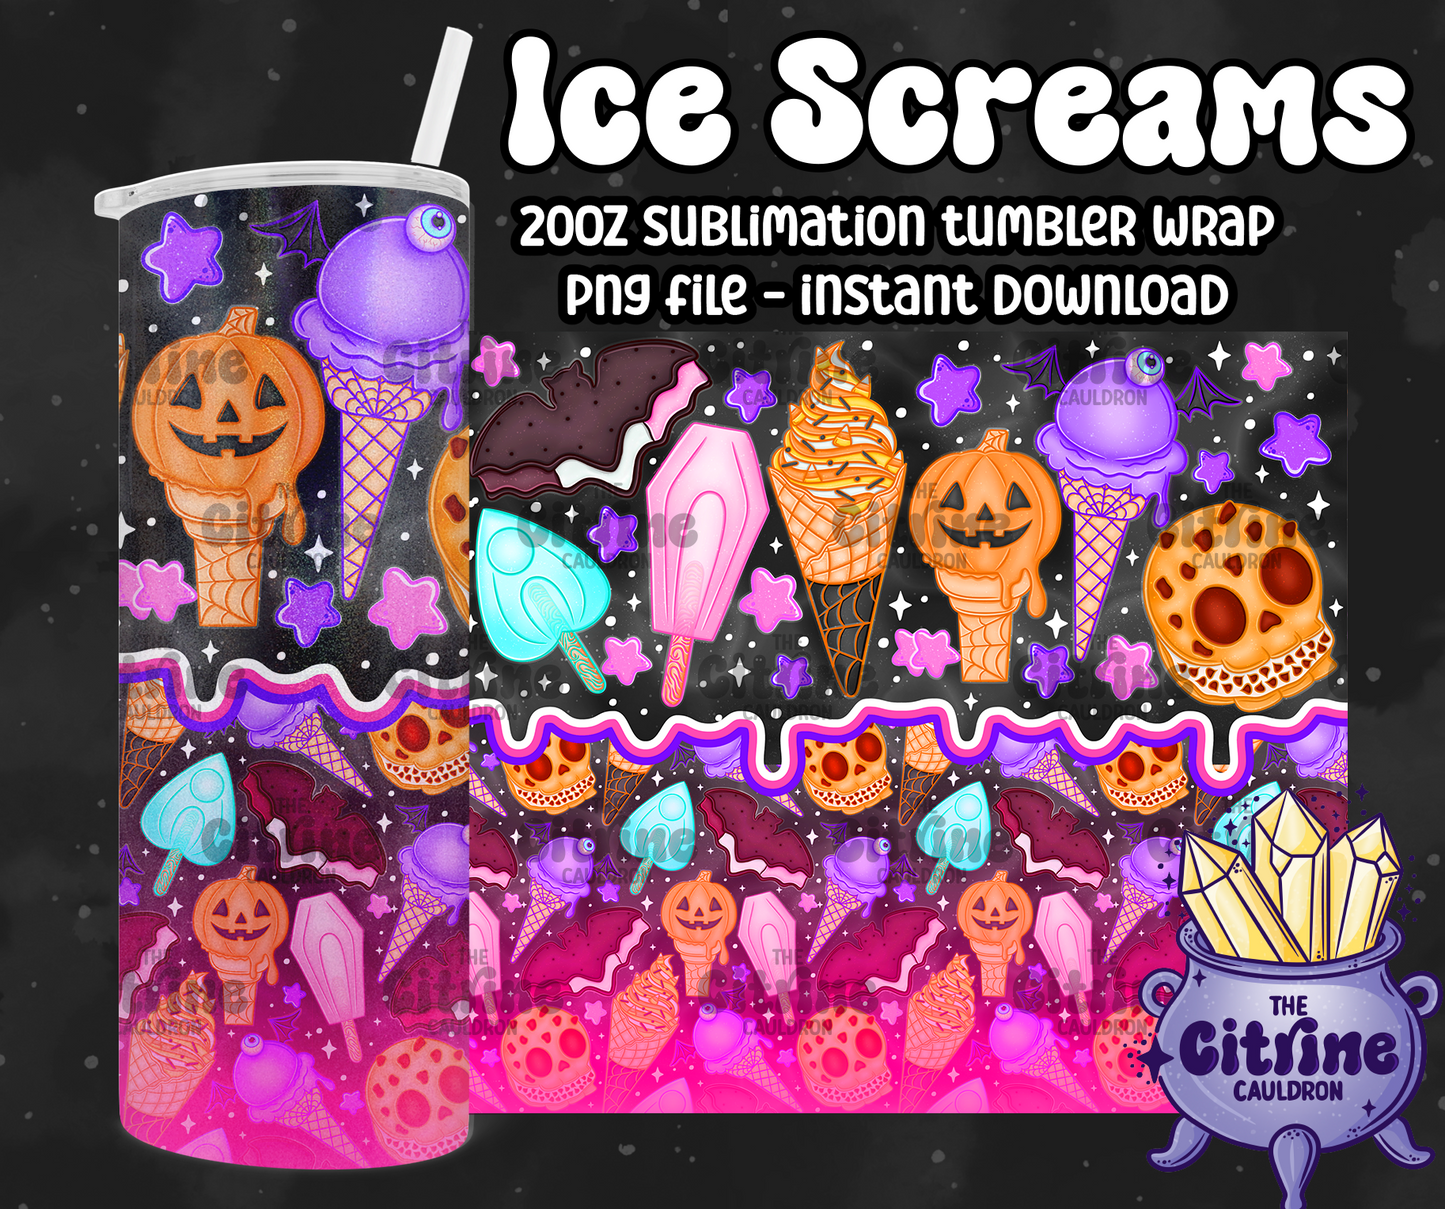 Ice Screams 2.0 - PNG Wrap for Sublimation 20oz Tumbler